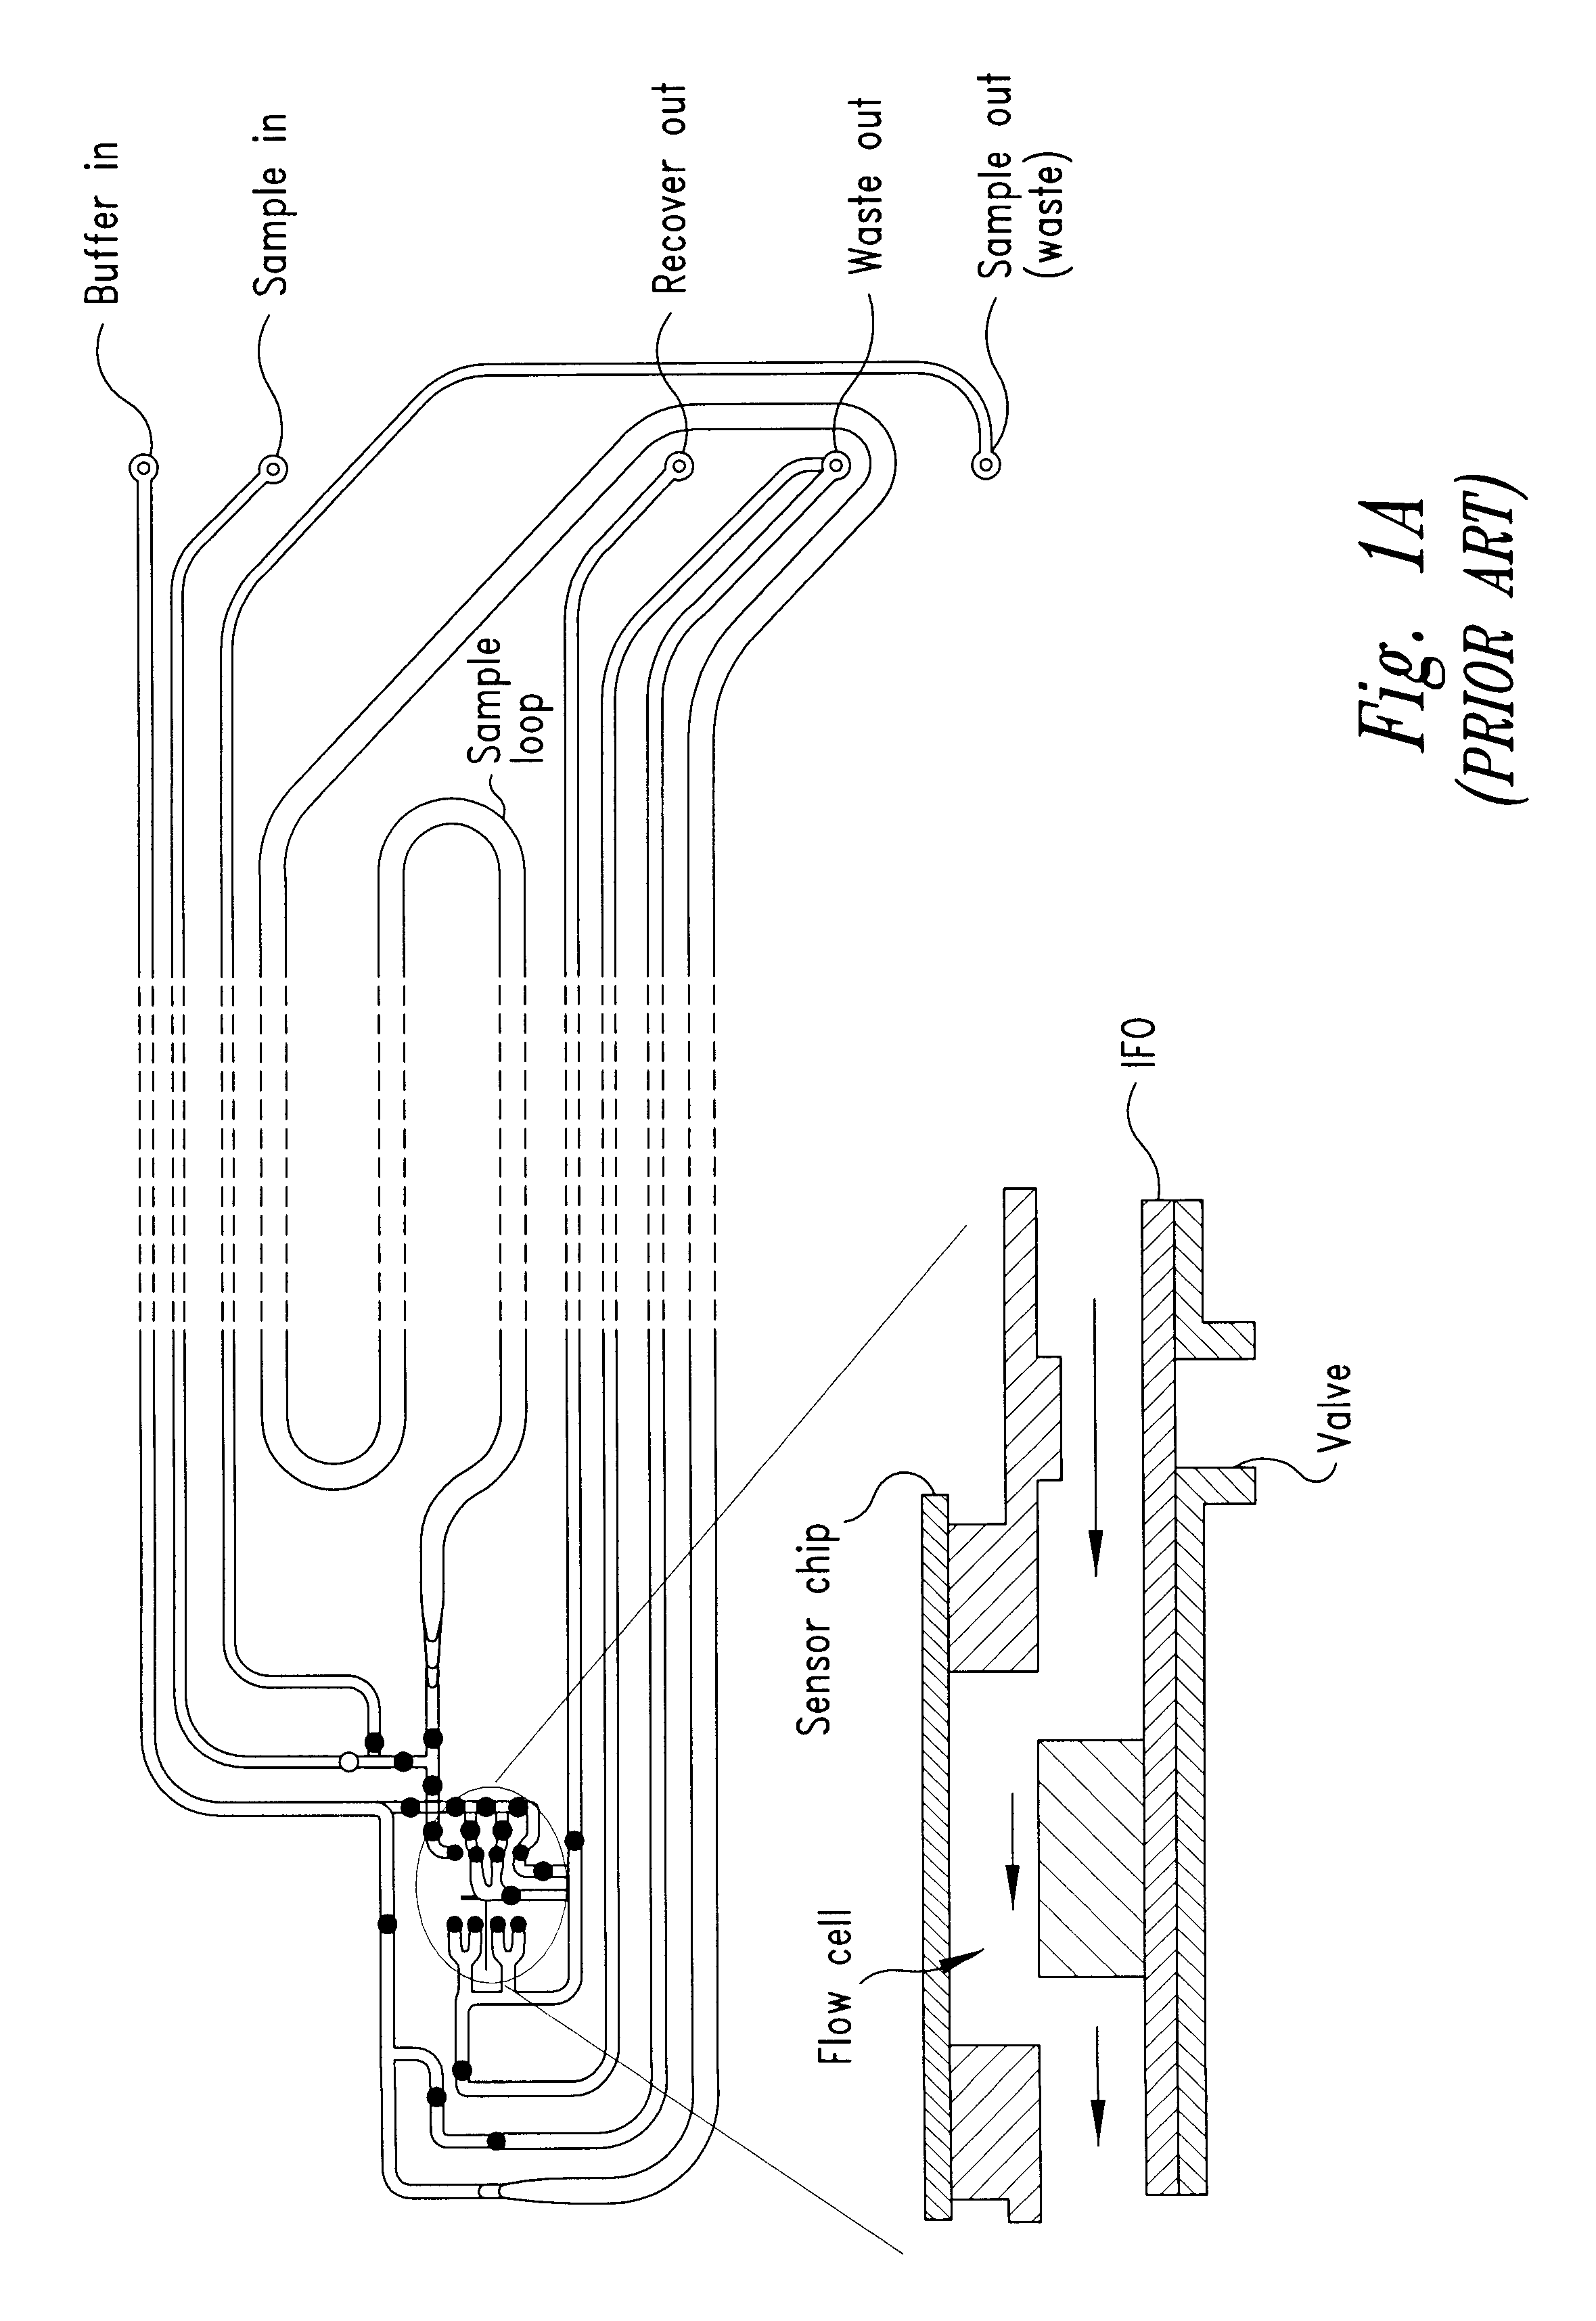 Method and device for laminar flow on a sensing surface